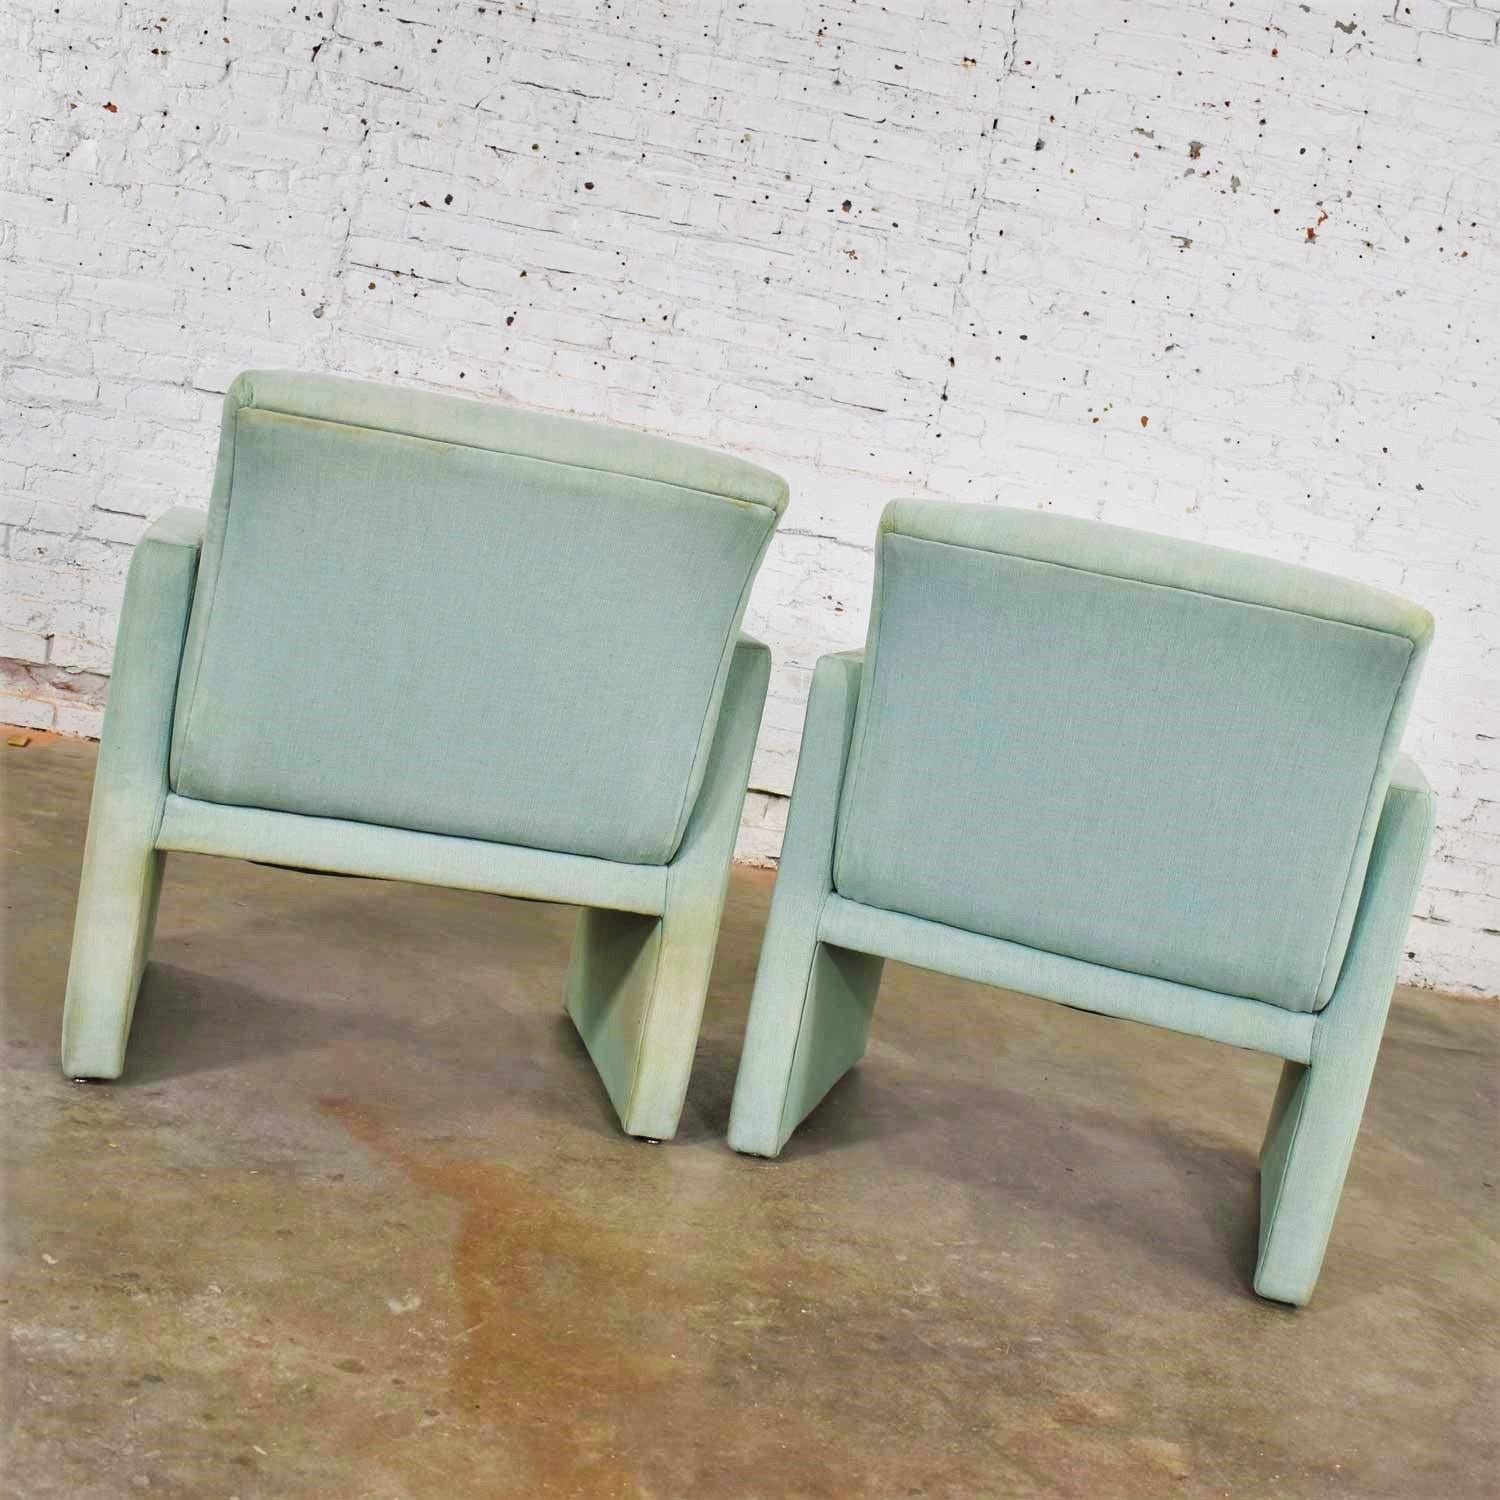 20th Century Pair of Petite Modern Accent Chairs in Sea Green